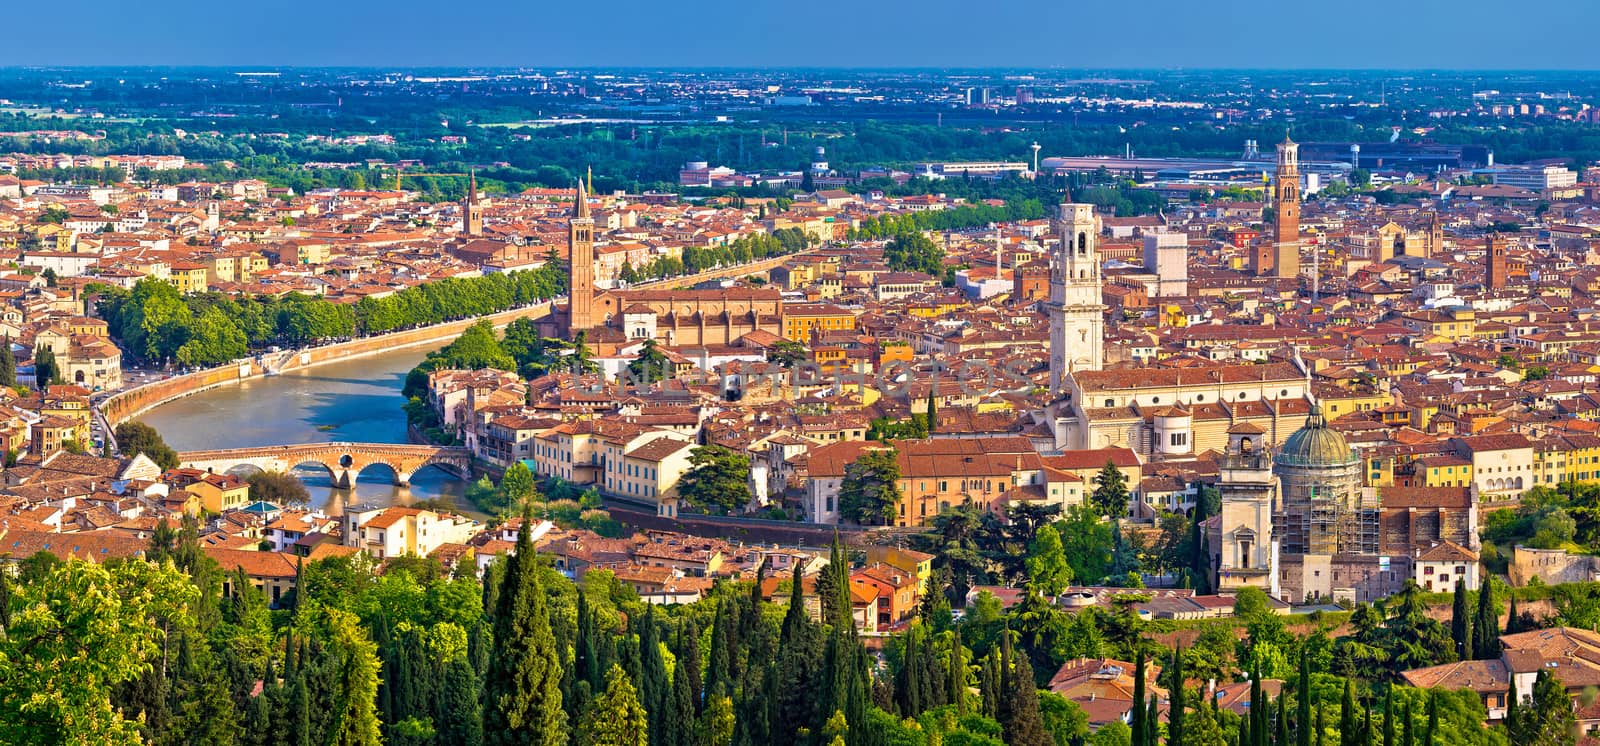 City of Verona old center and Adige river aerial panoramic view by xbrchx